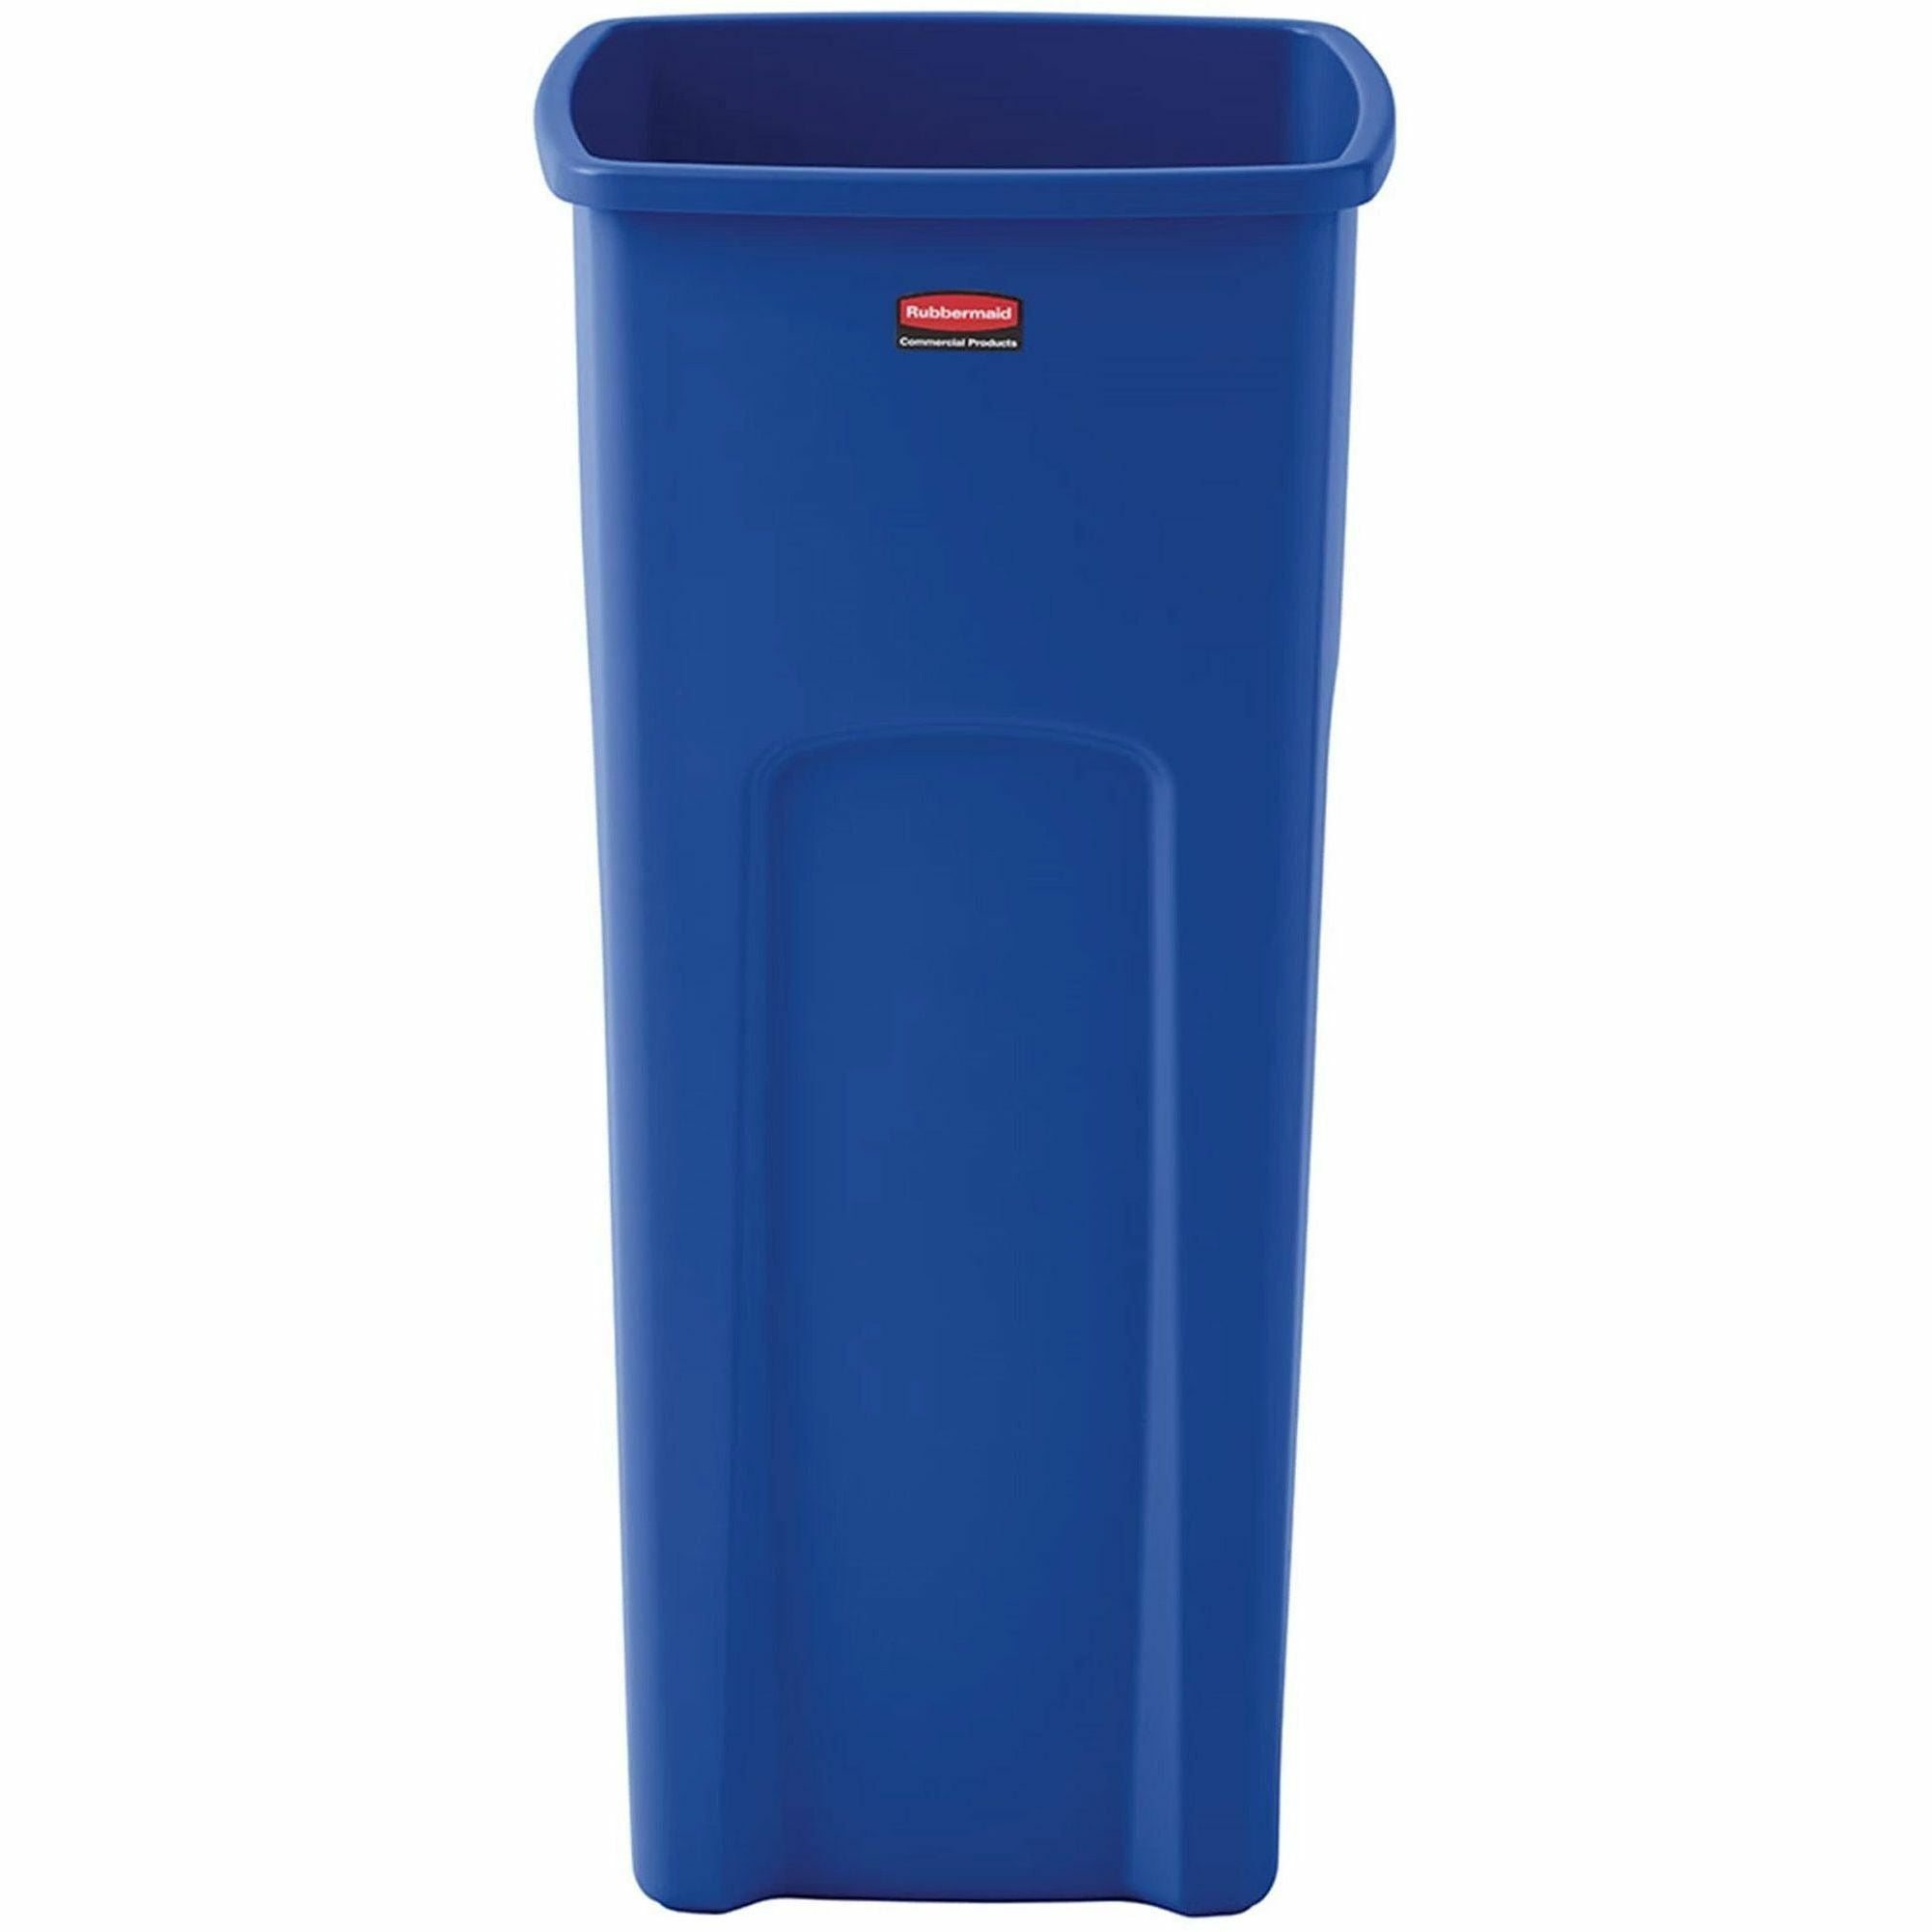 rubbermaid-commercial-untouchable-square-container-23-gal-capacity-square-329-height-x-165-width-x-155-depth-resin-blue-4-carton_rcp356973bect - 2